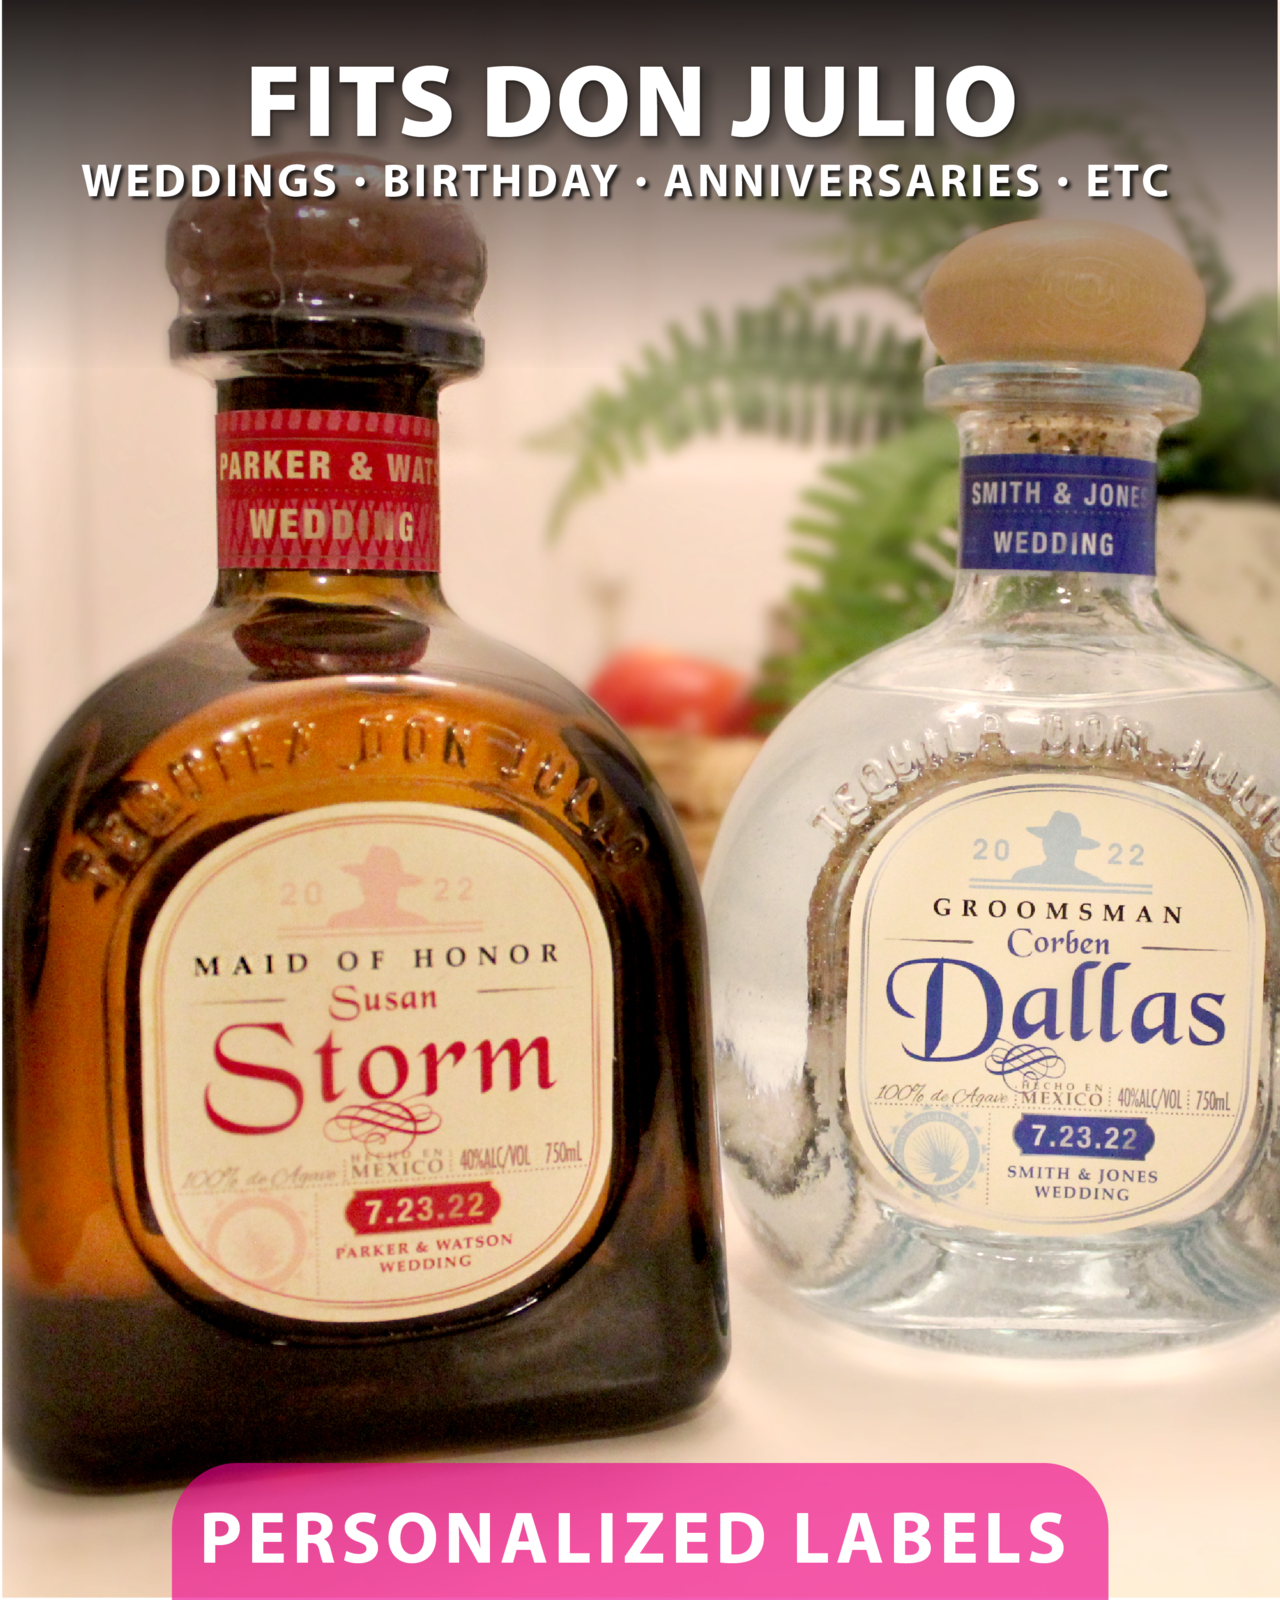 Personalized Label to fit Don Julio Tequila Bottle for Weddings, Birthdays, Etc.